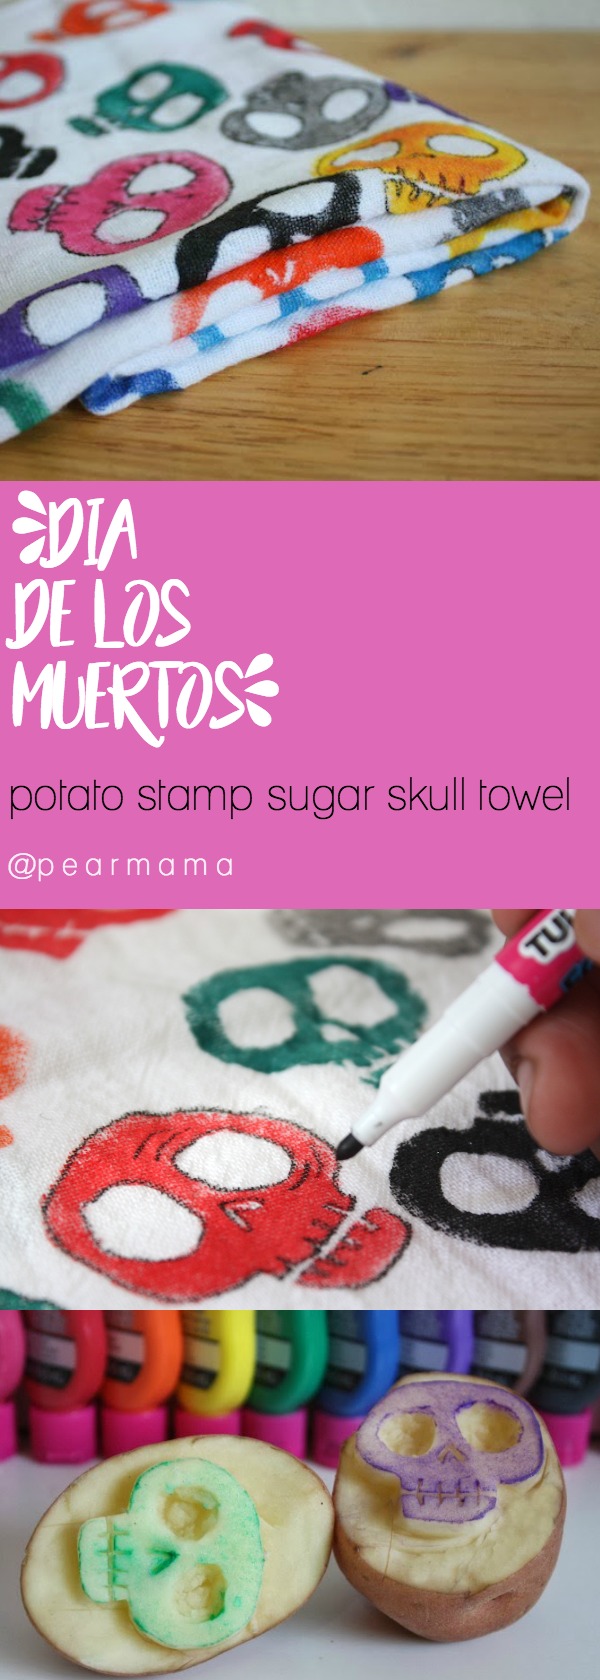 In honor of Dia de los Muertos, make your own sugar skull kitchen toalla (towel) using a potato stamp, fabric paint and a white flour sack towel.